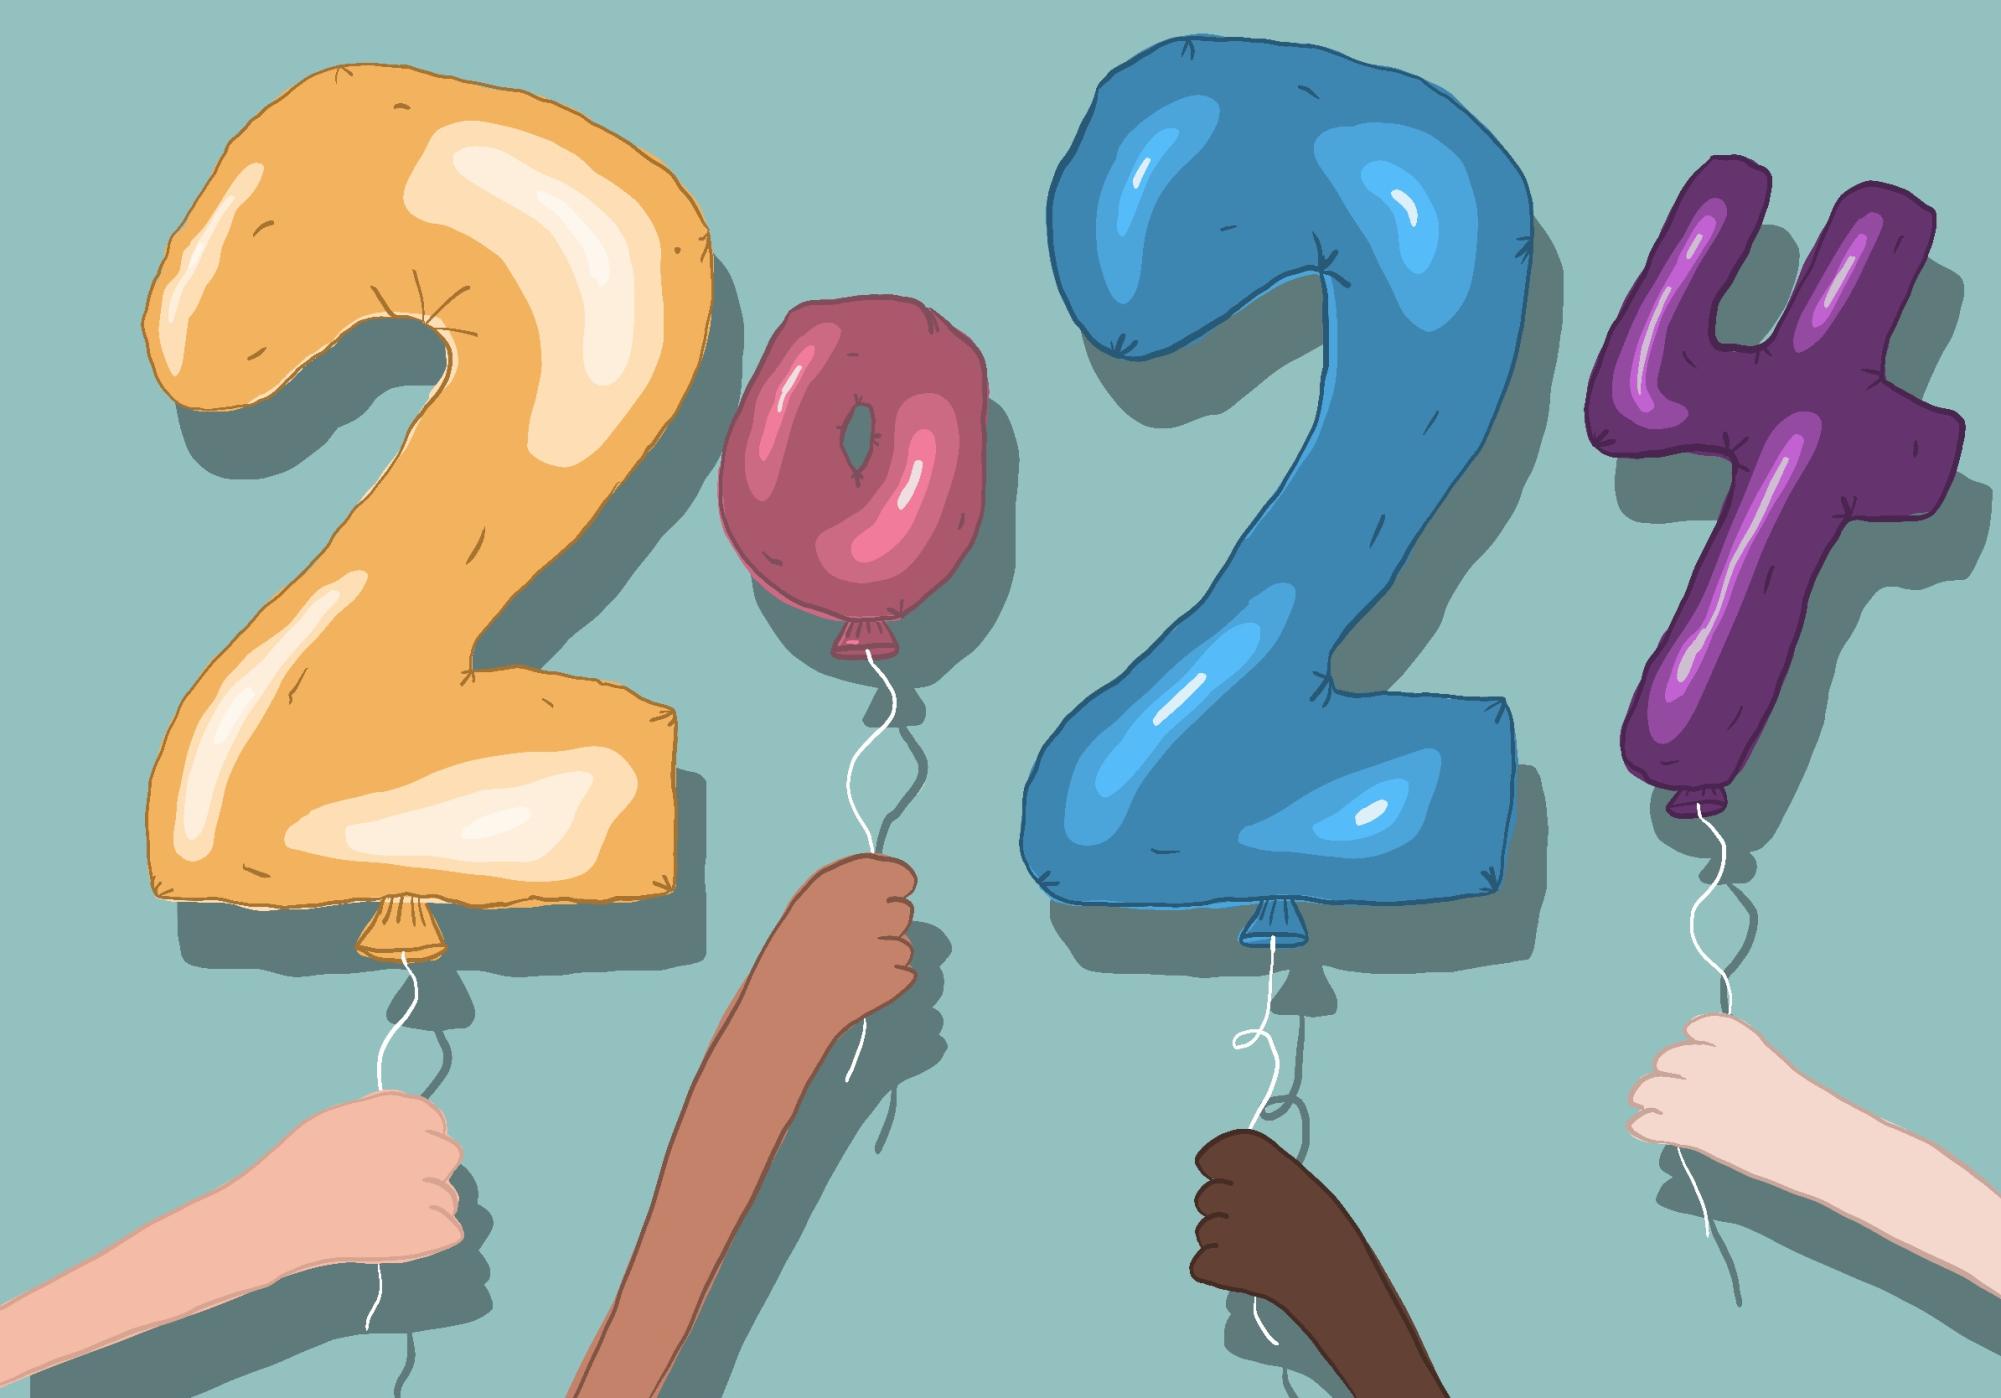 Mollys illustration for the culture staff ins and outs for 2024. Four balloons reading 2024 being held by four different hands.